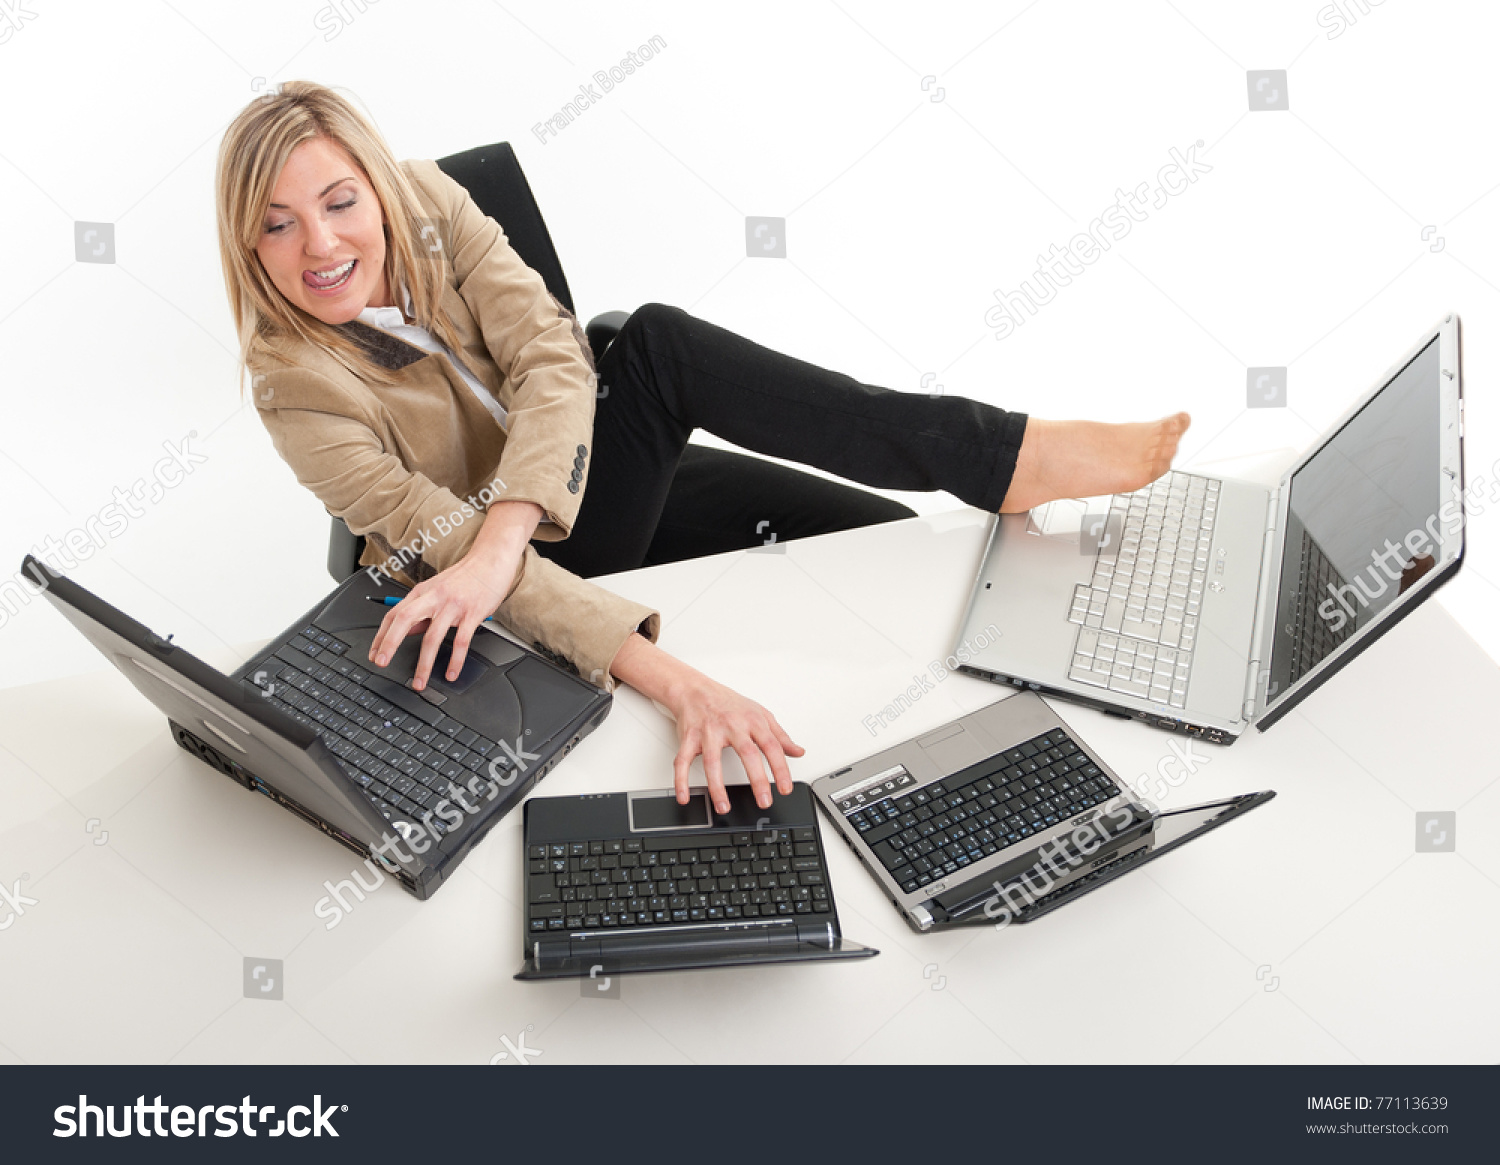 stock-photo-young-women-in-a-desk-overcrowded-with-computers-typing-with-both-hands-and-feet-7...jpg